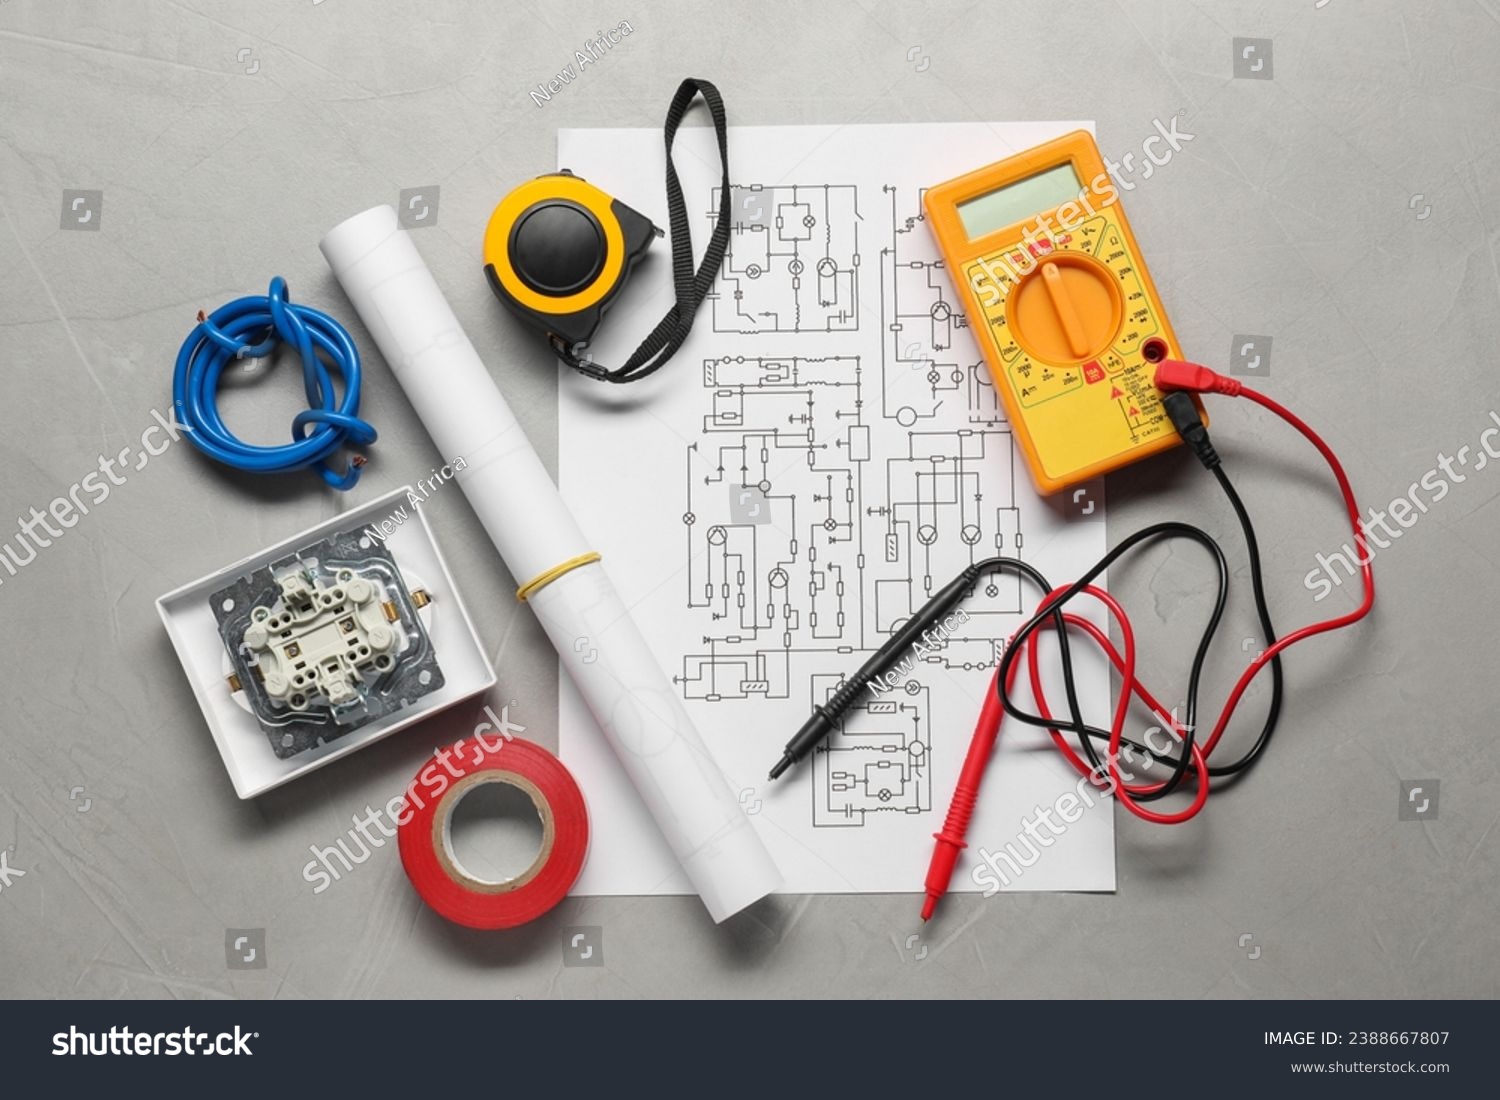 Wiring diagram, wires and digital multimeter on light grey table, flat lay #2388667807